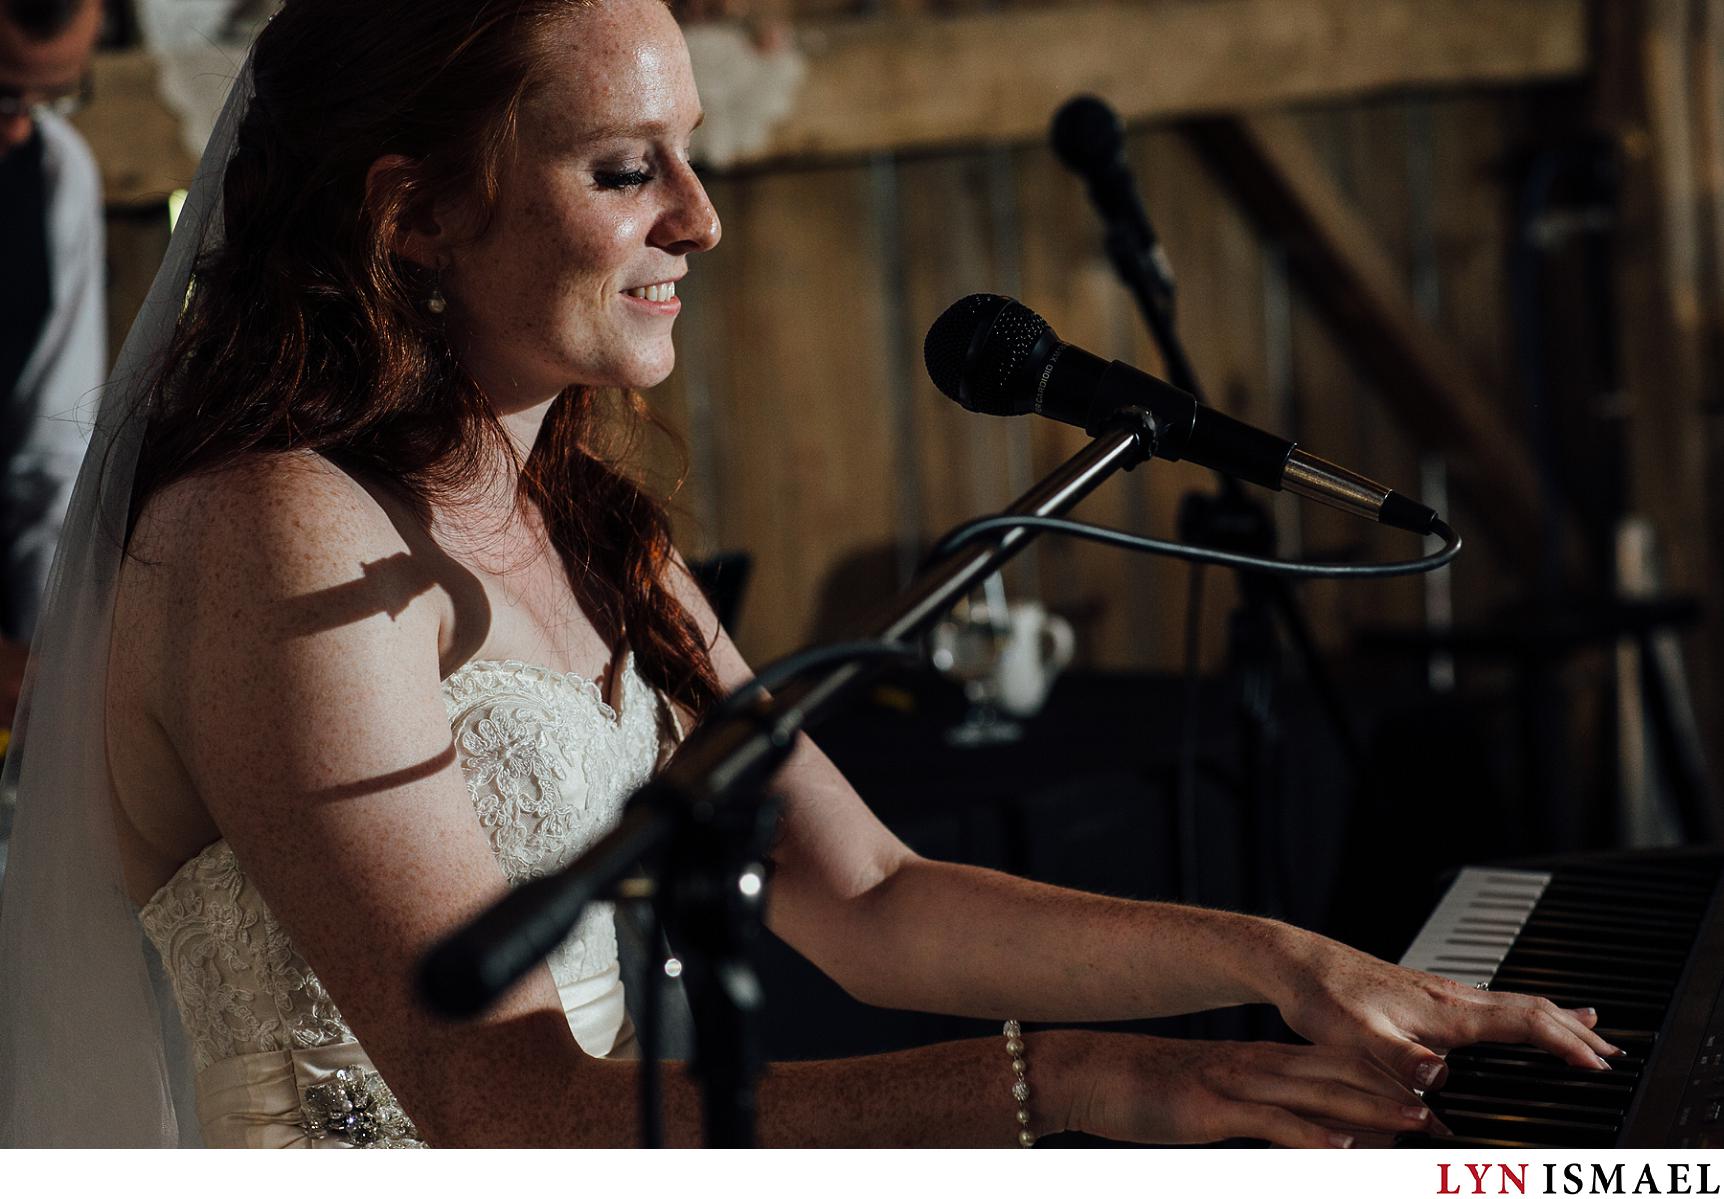 The bride plays a song for the groom